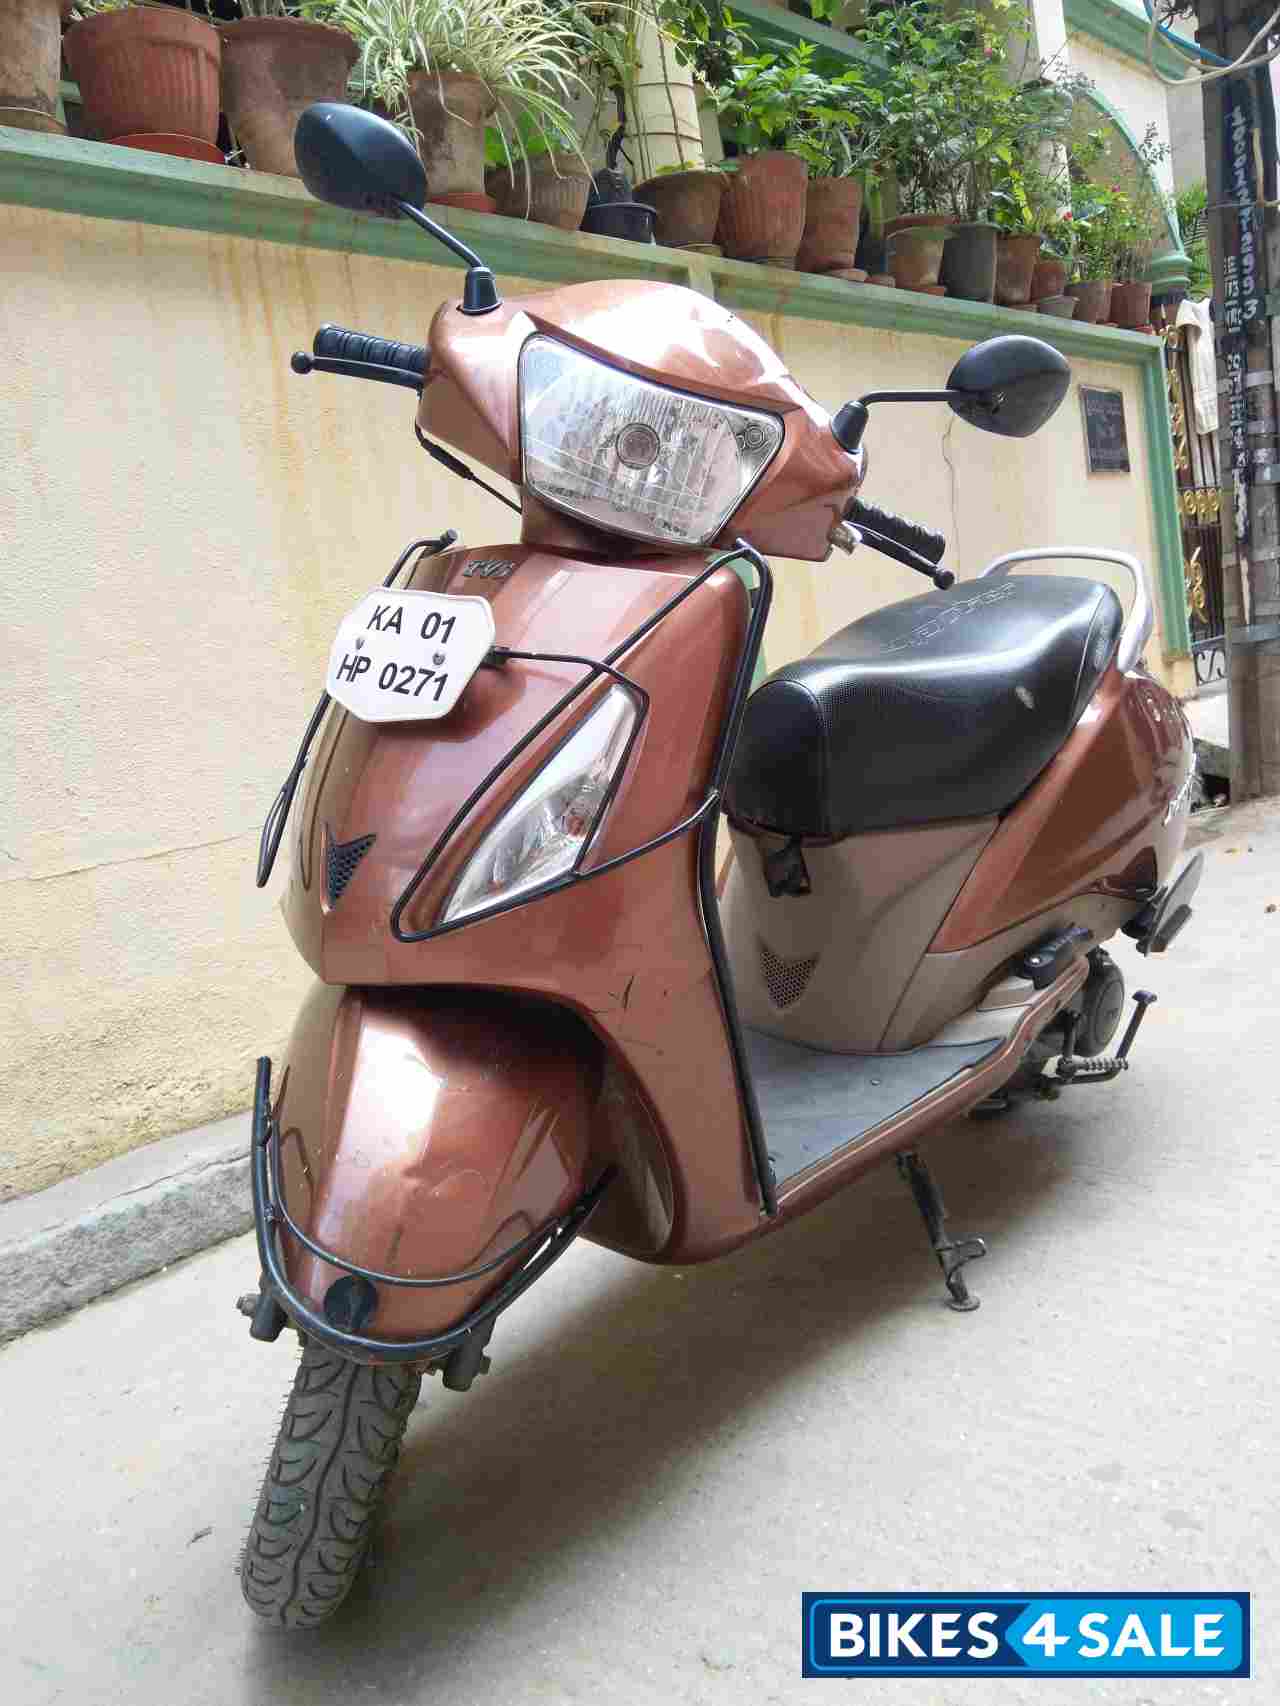 Used 2016 model TVS Jupiter for sale in Bangalore. ID ...